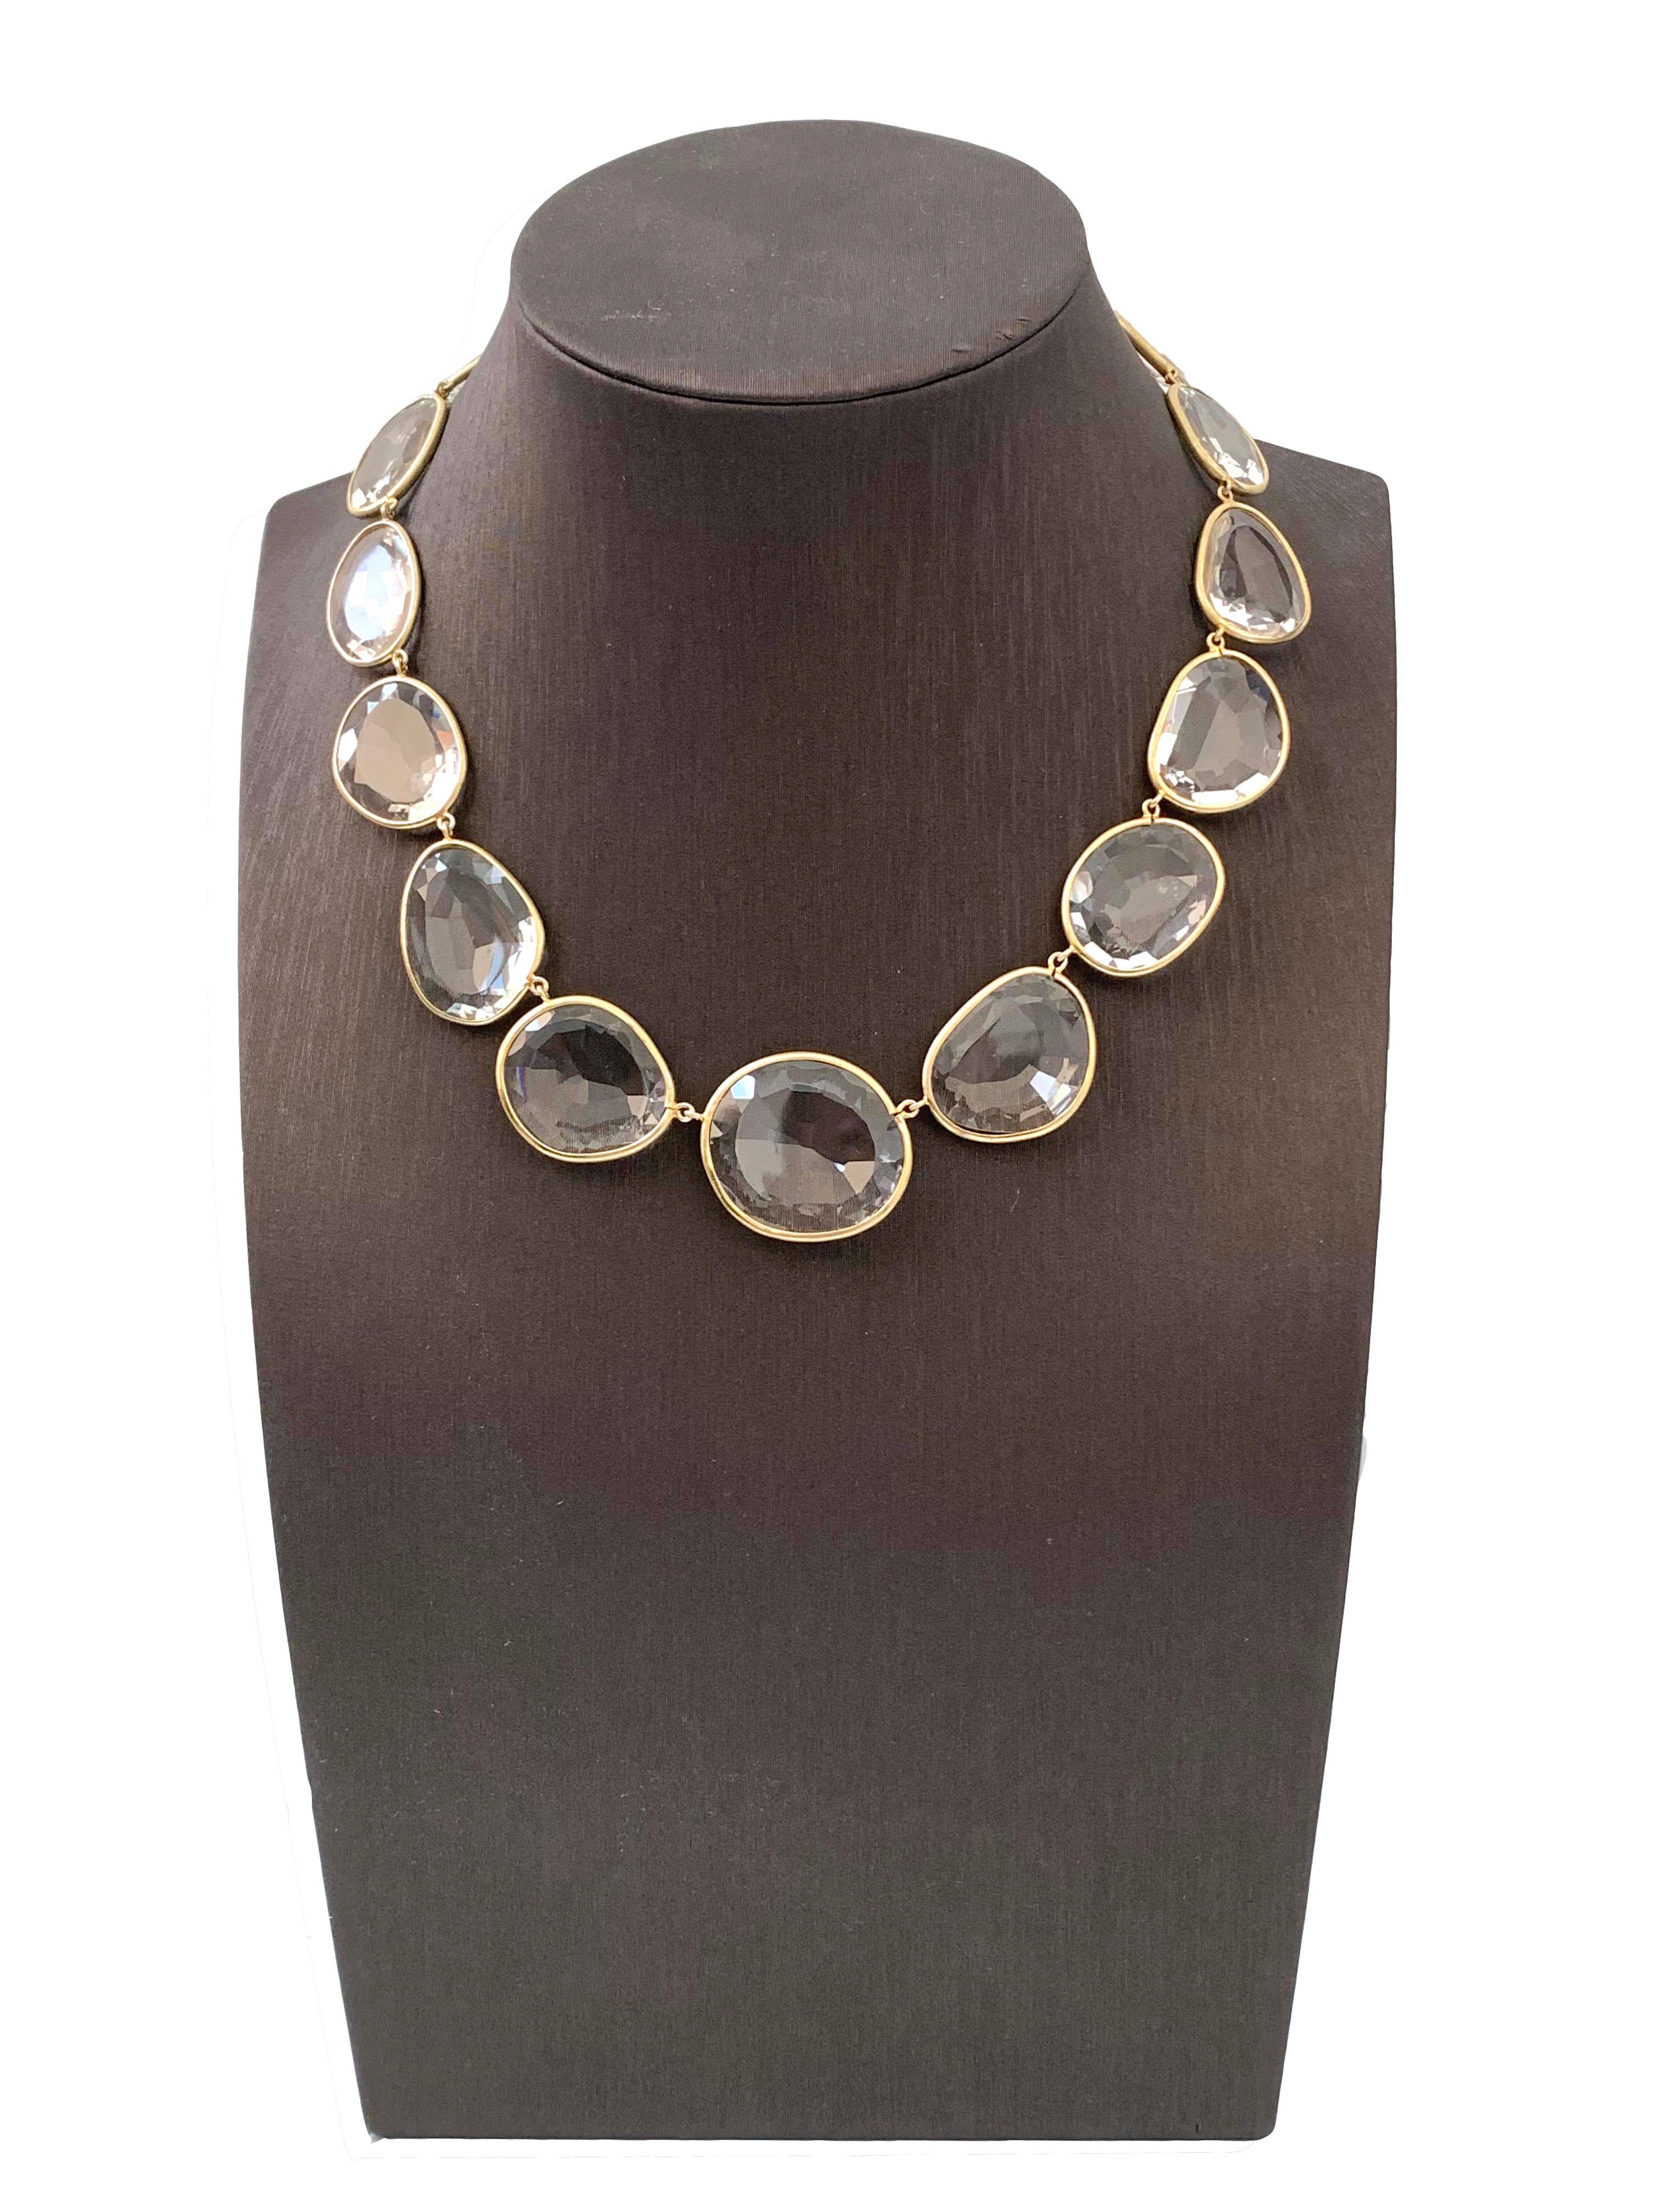 Discover Bezel set White Topaz Necklace. The necklace features 7 pieces of large unique fancy-shape rose-cut white topaz (281 ctw) individually hand set in vermeil 18k gold plated sterling silver. The stones on this necklace are very clear with no